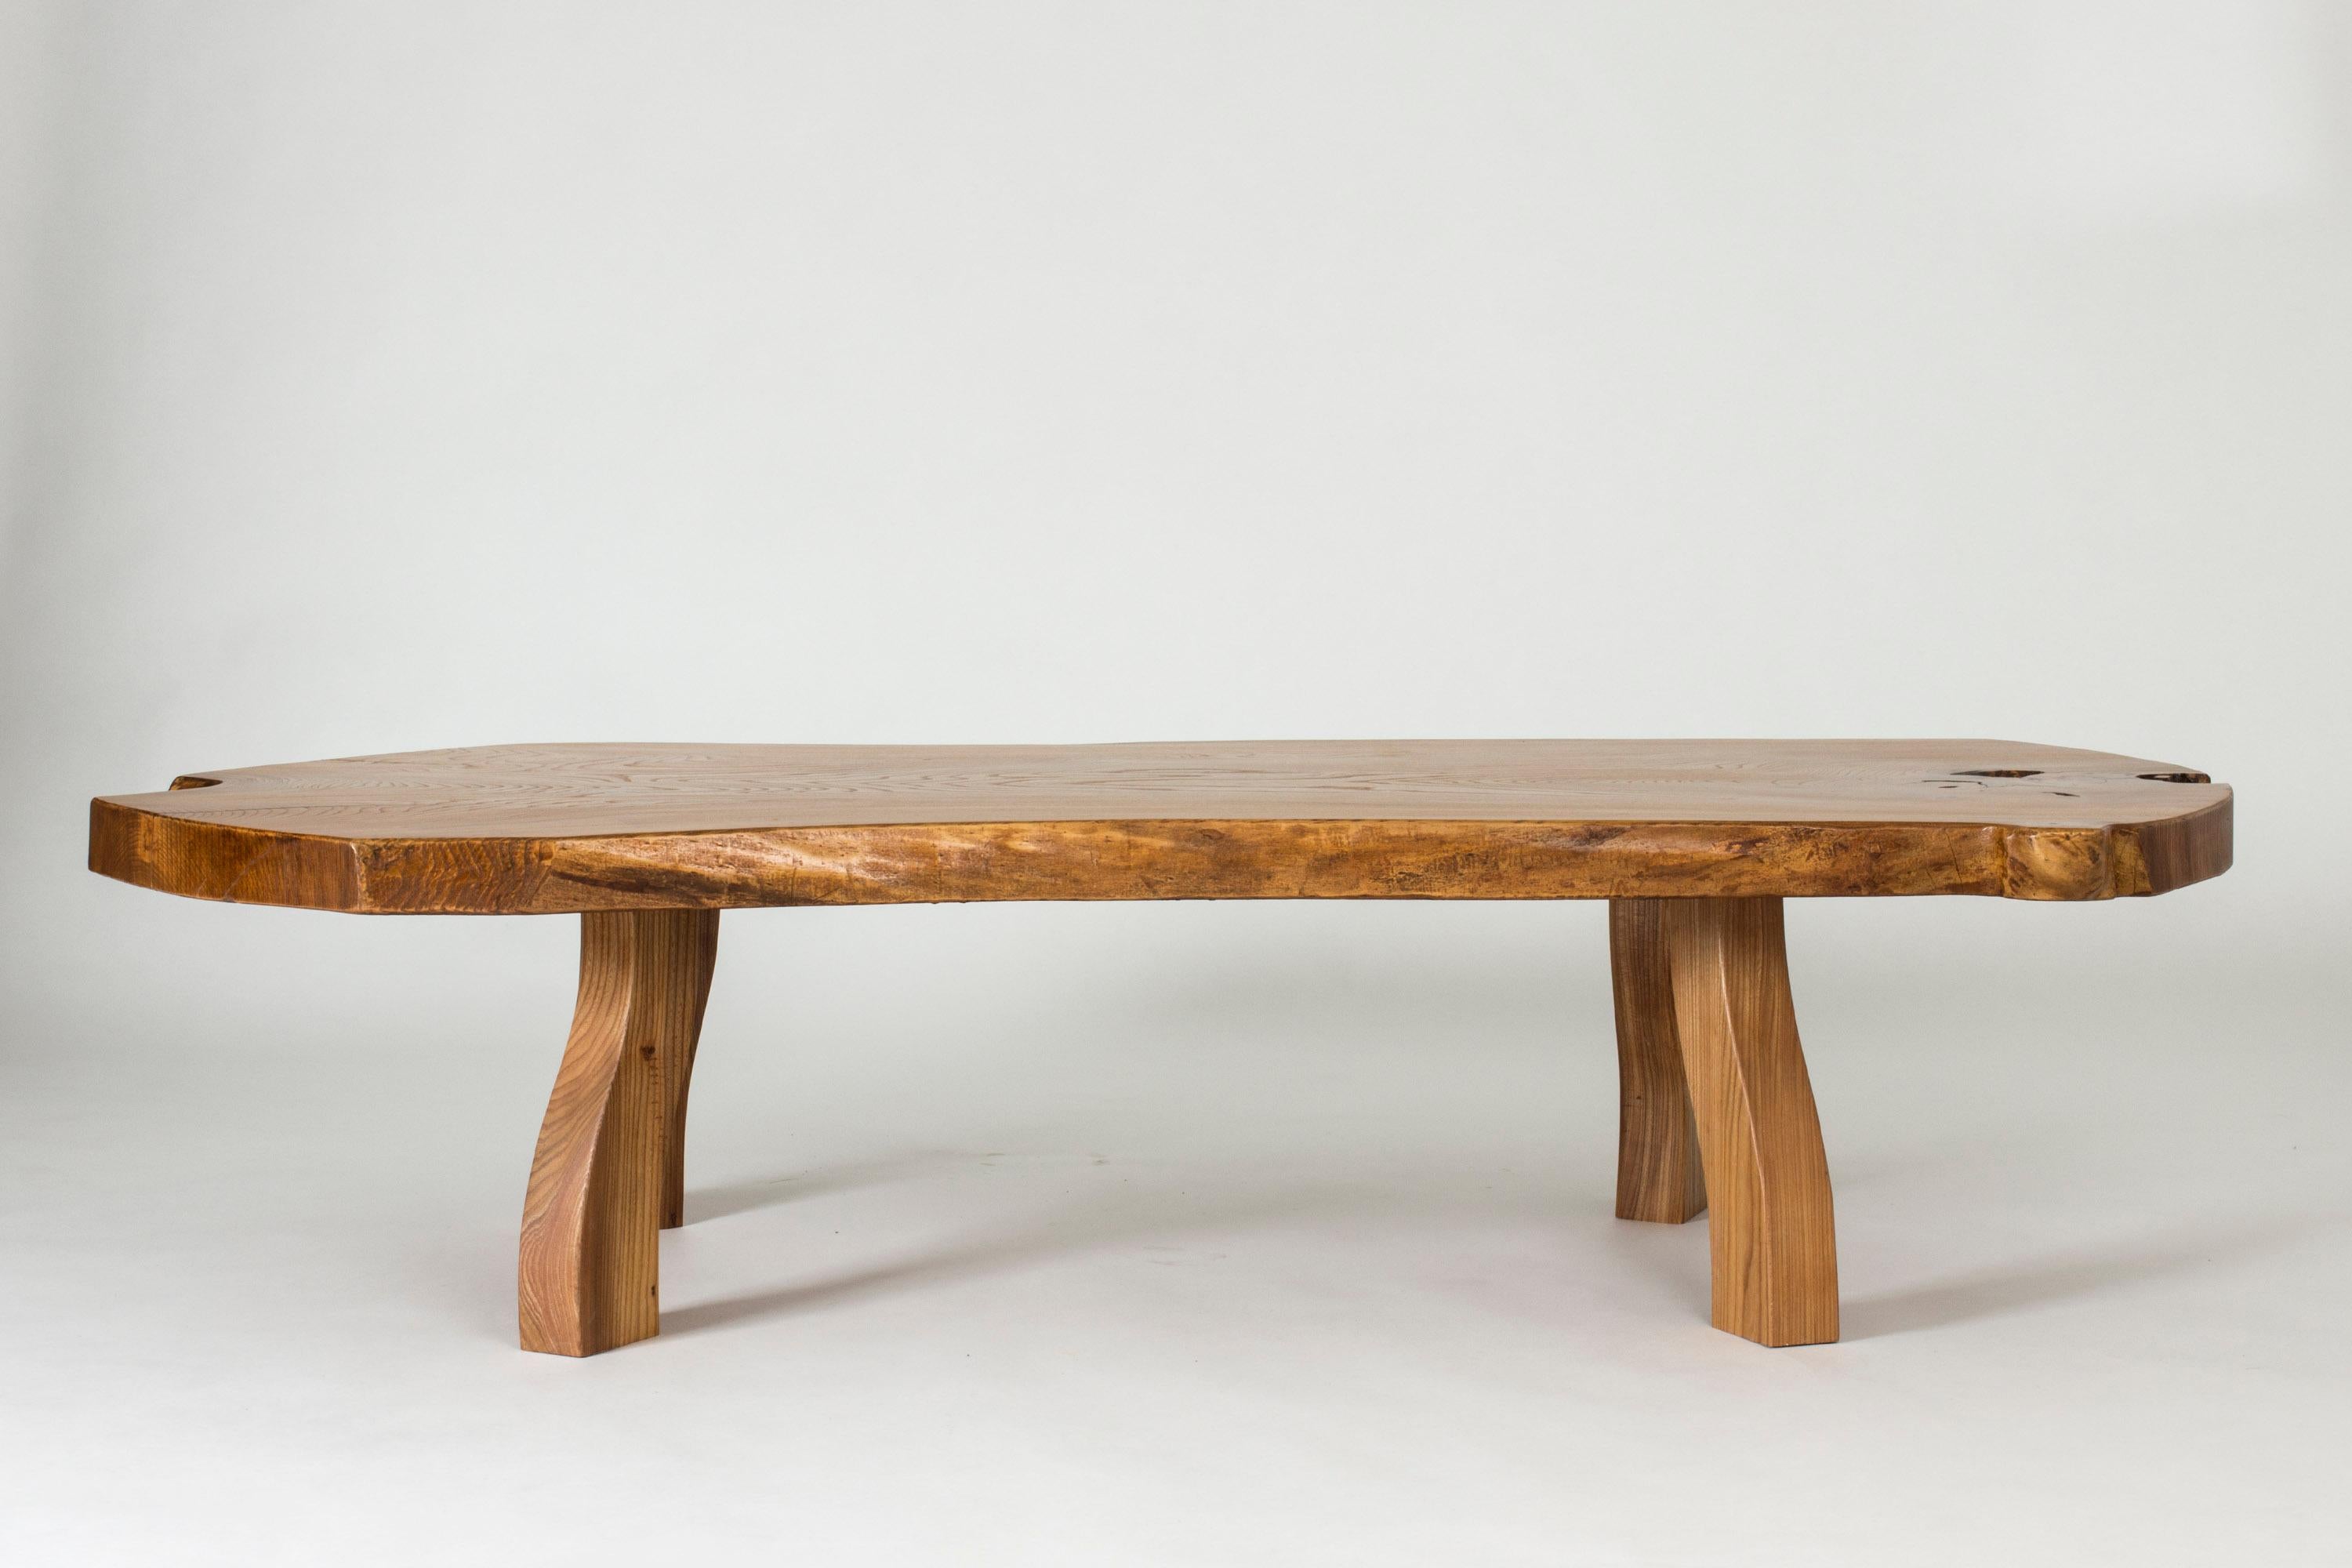 Striking elmwood coffee table by Carl-Axel Beijbom. Made from a large, thick elmwood slab with brutish, sculpted legs. Lively wood grain and accentuated knots at the far edges.